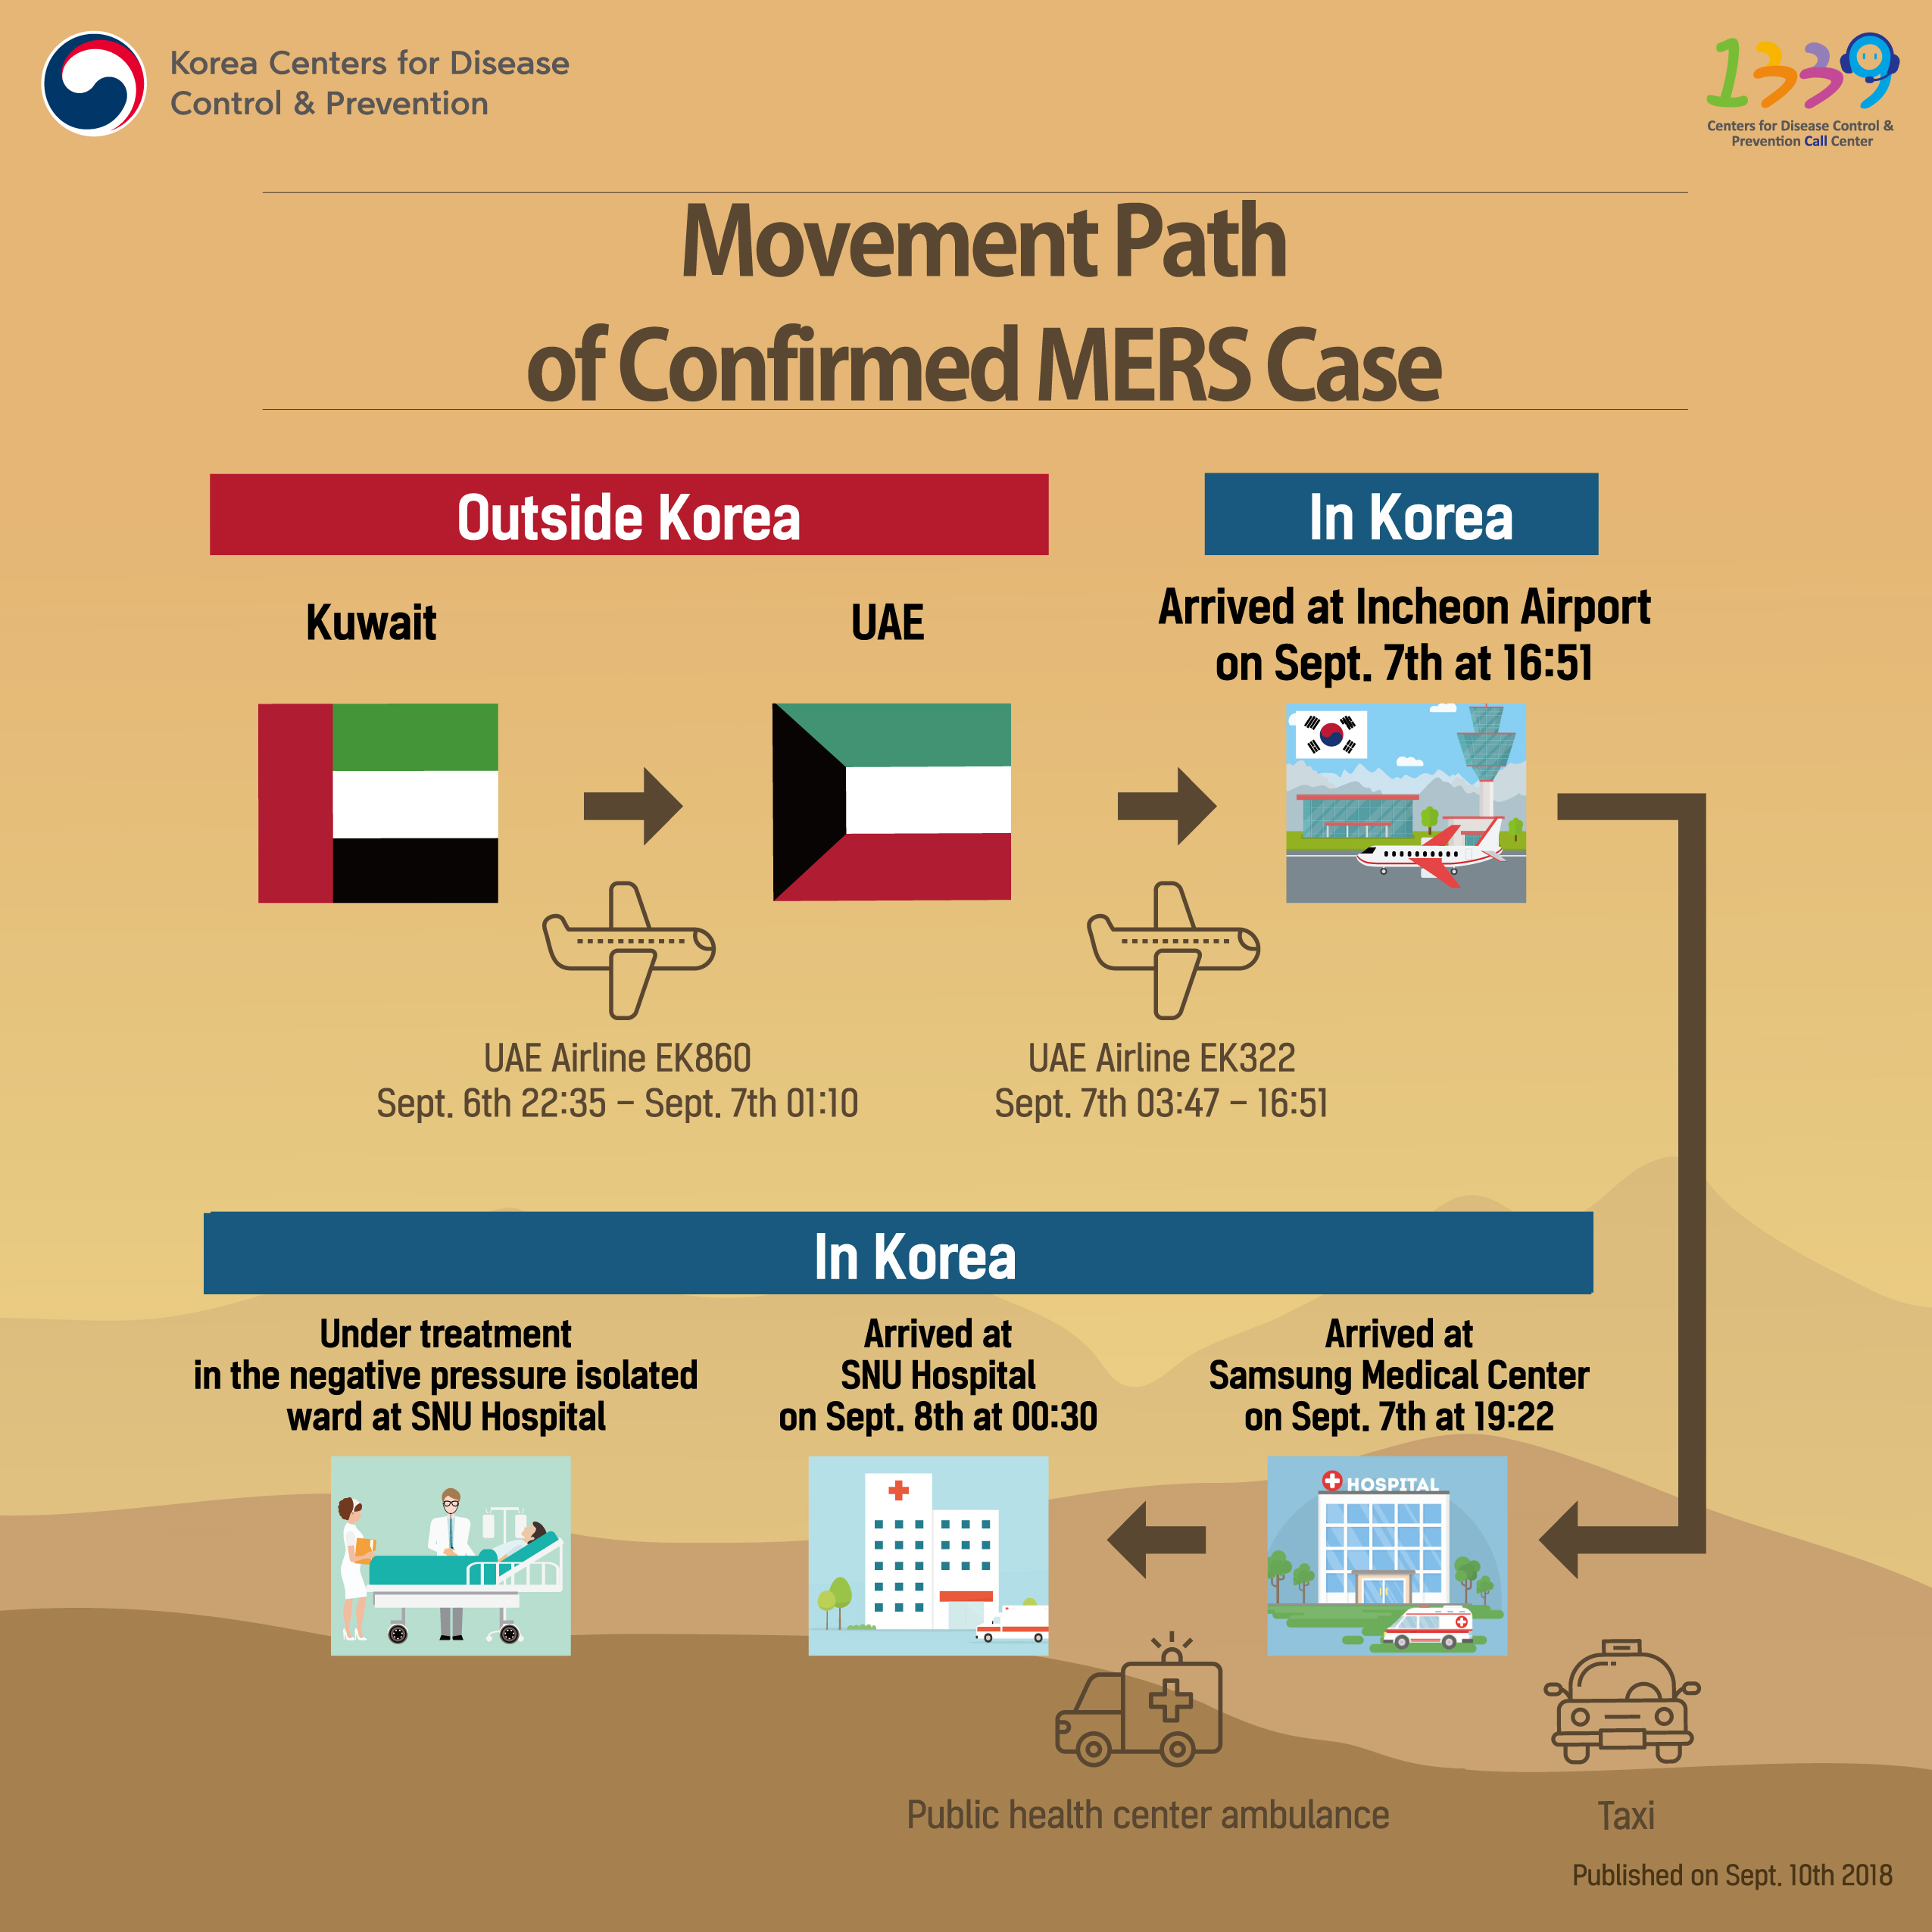 Korea Center for Disease Control&Prevention.
[Movement Path of Confirmed MERS Case]
Outside Korea
Kuwait
UAE Airline EK860 Sept. 6th 22:35 - Sept. 7th 01:10
UAE
UAE Airline EK322 Sept. 7th 03:47 - 16:51
In Korea
Arrived at Incheon Airport on Sept. 7th at 16:51
Taxi
Arrived at Samsung Medical Center on Sept. 7th at 19:22
Public health center ambulance
Arrived at SNU Hospital on Sept. 8th at 00:30
Under treatment in the negative pressure isolated ward at SNU Hospital
Published on Sept. 10th 2018
